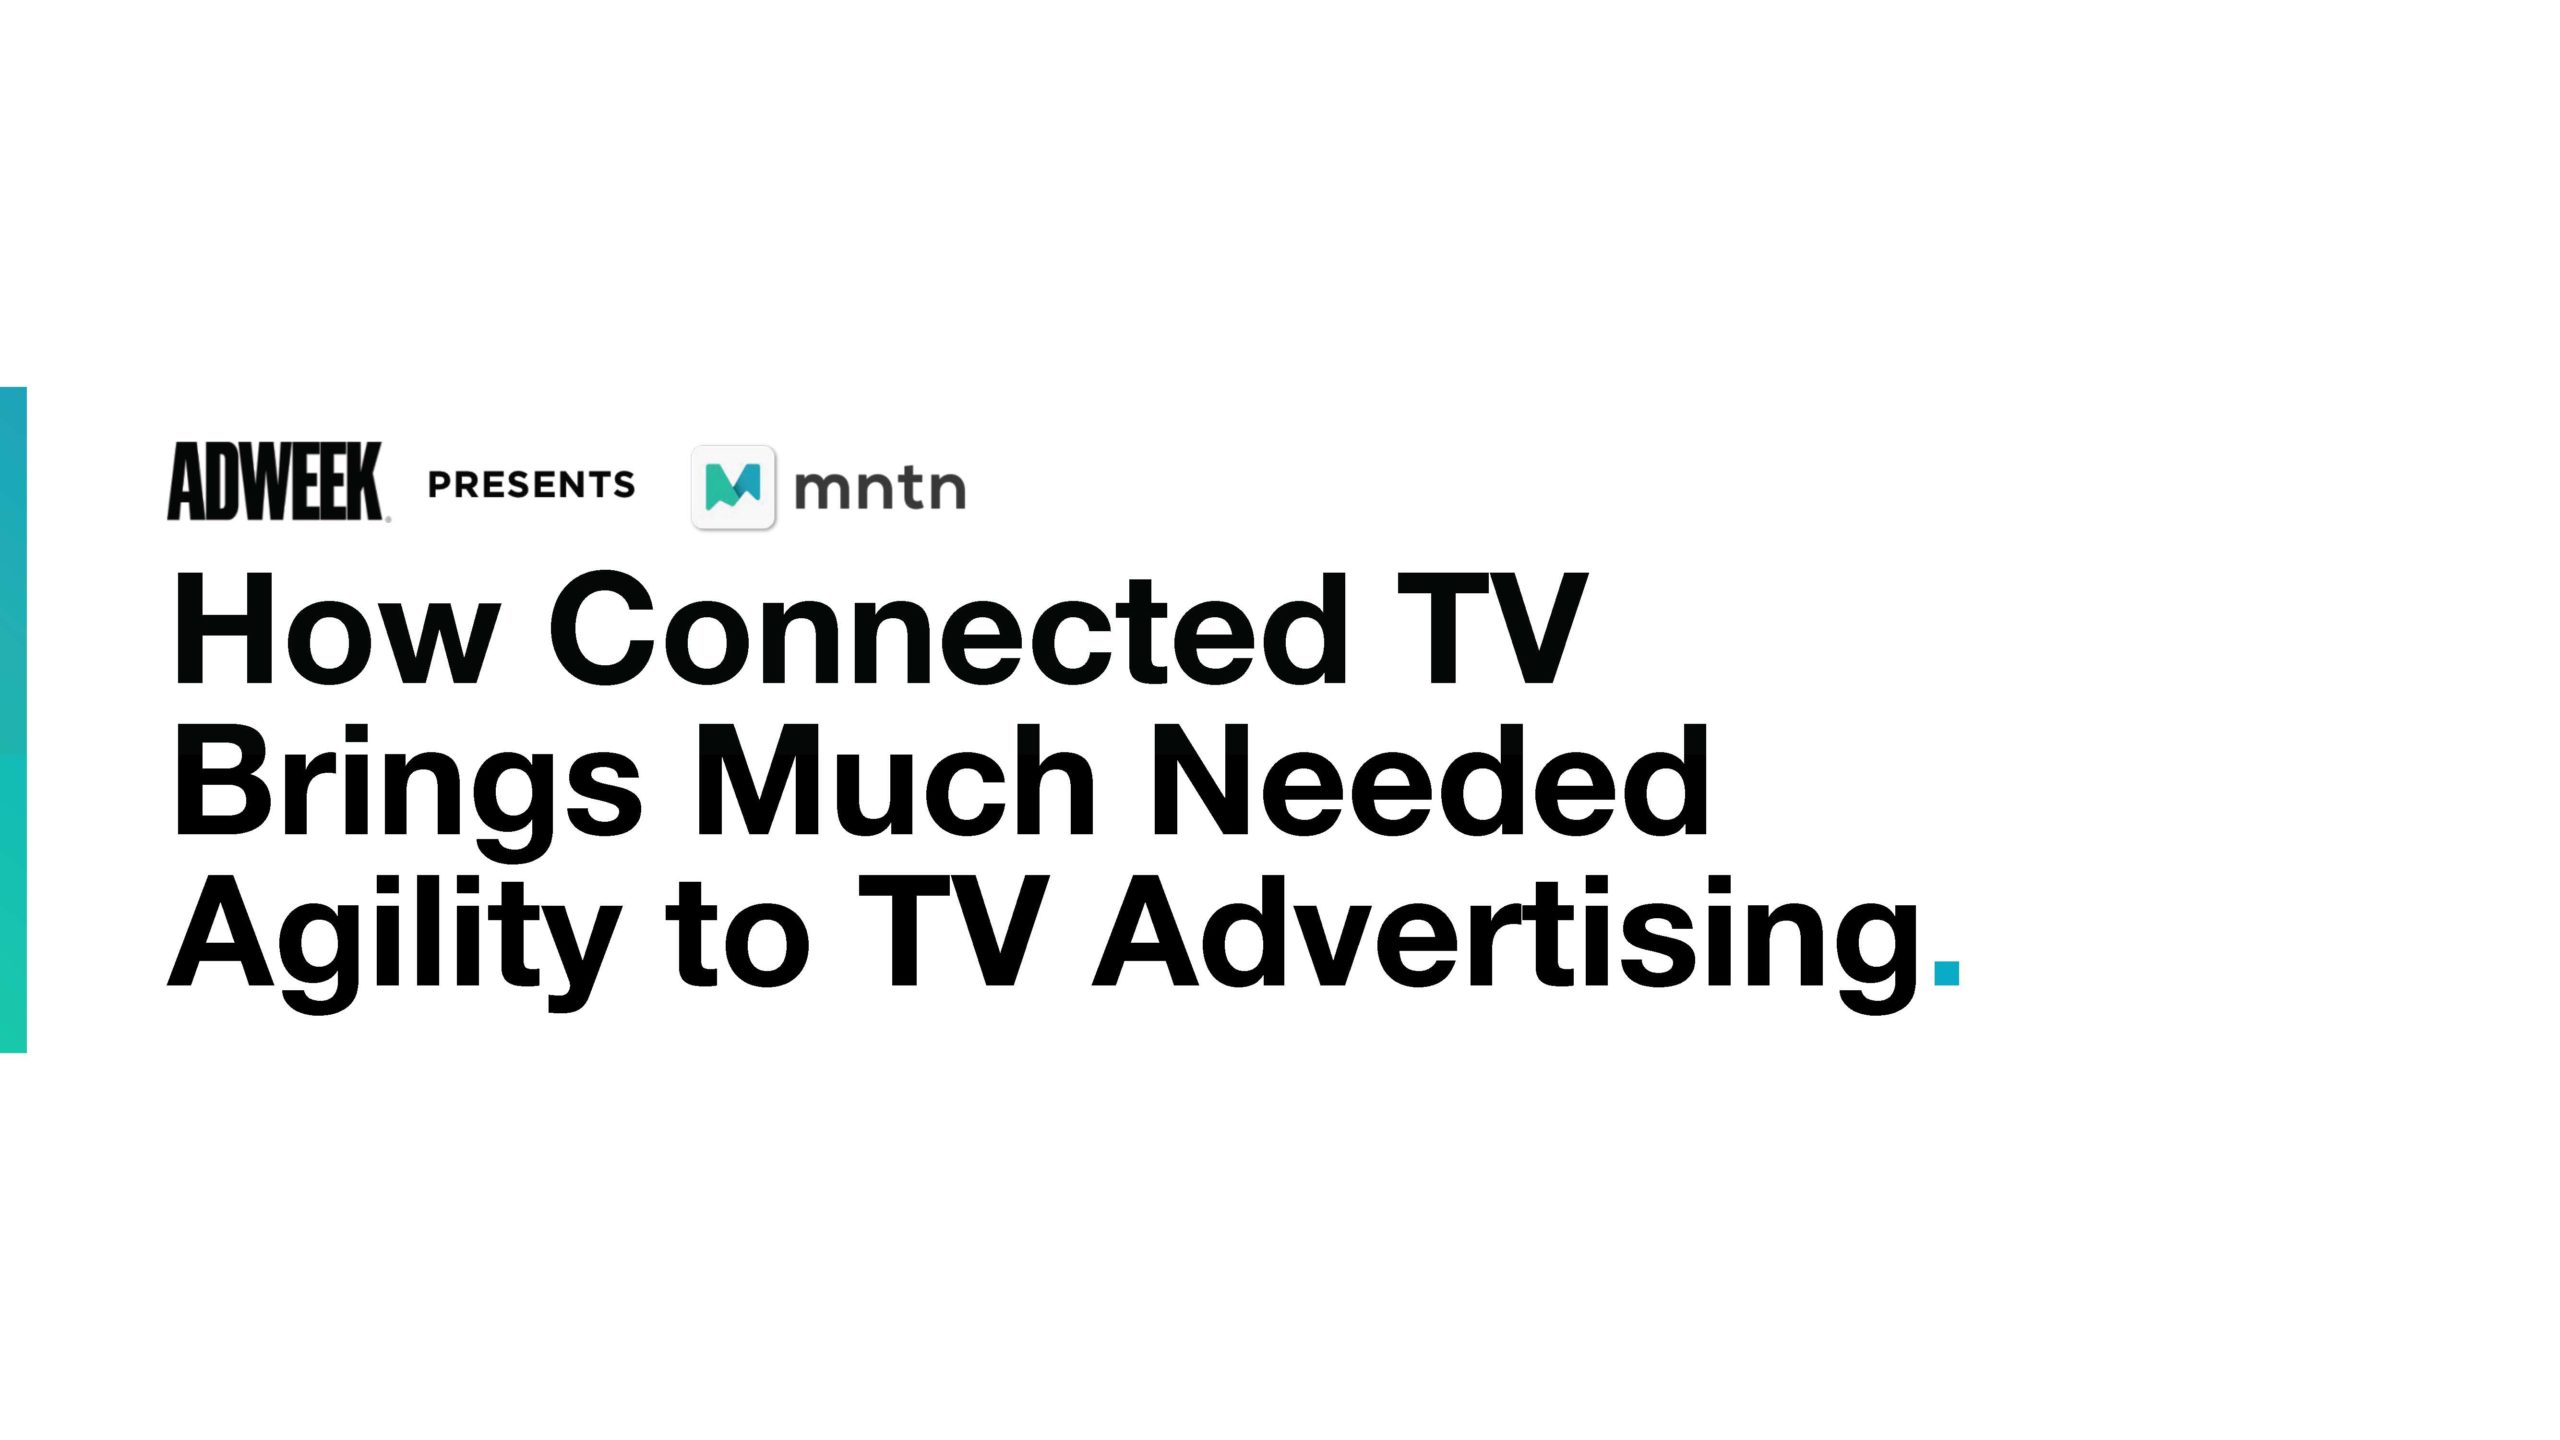 How Connected TV Brings Much-Needed Agility to TV Advertising